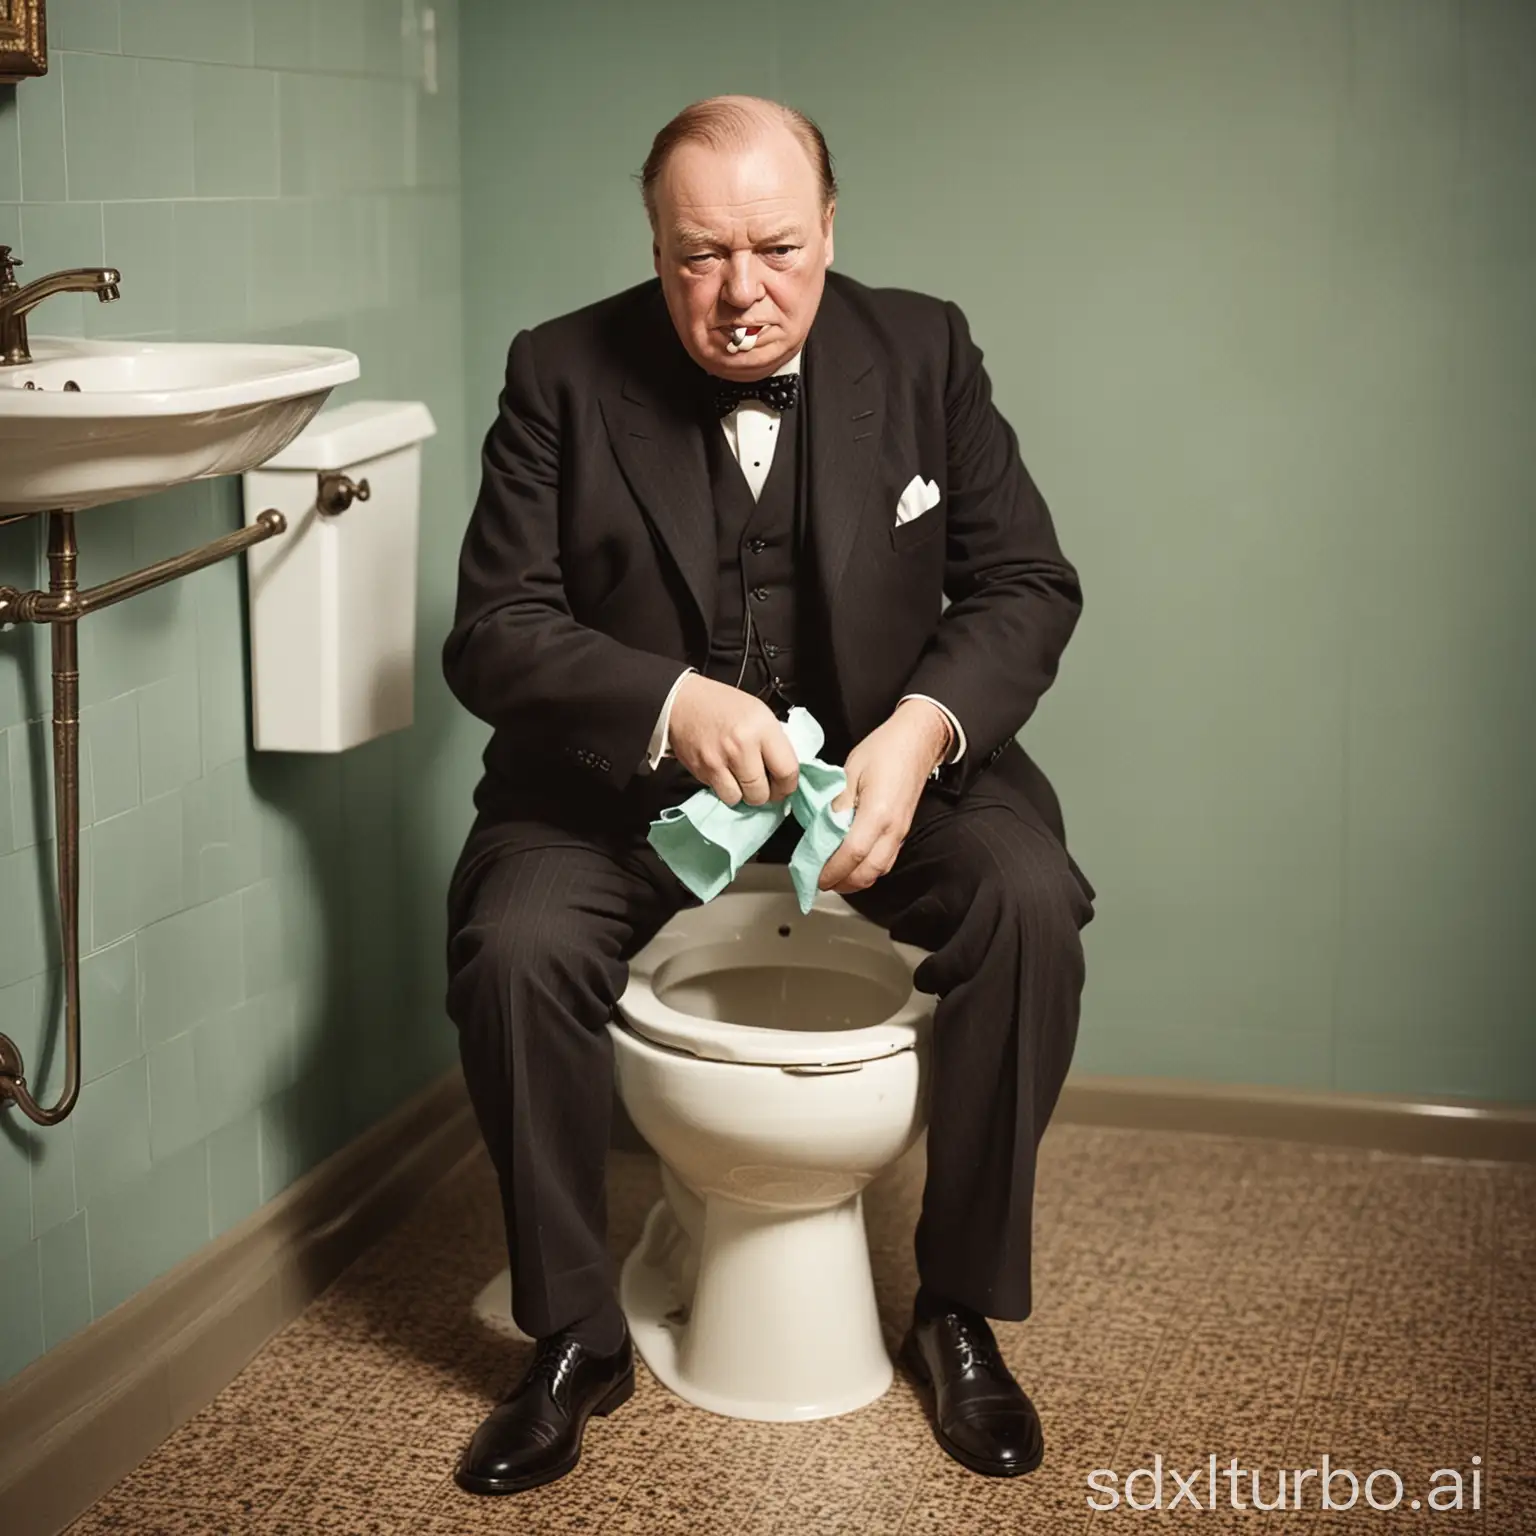 Winston-Churchill-Cleaning-Toilet-in-Vintage-Photograph